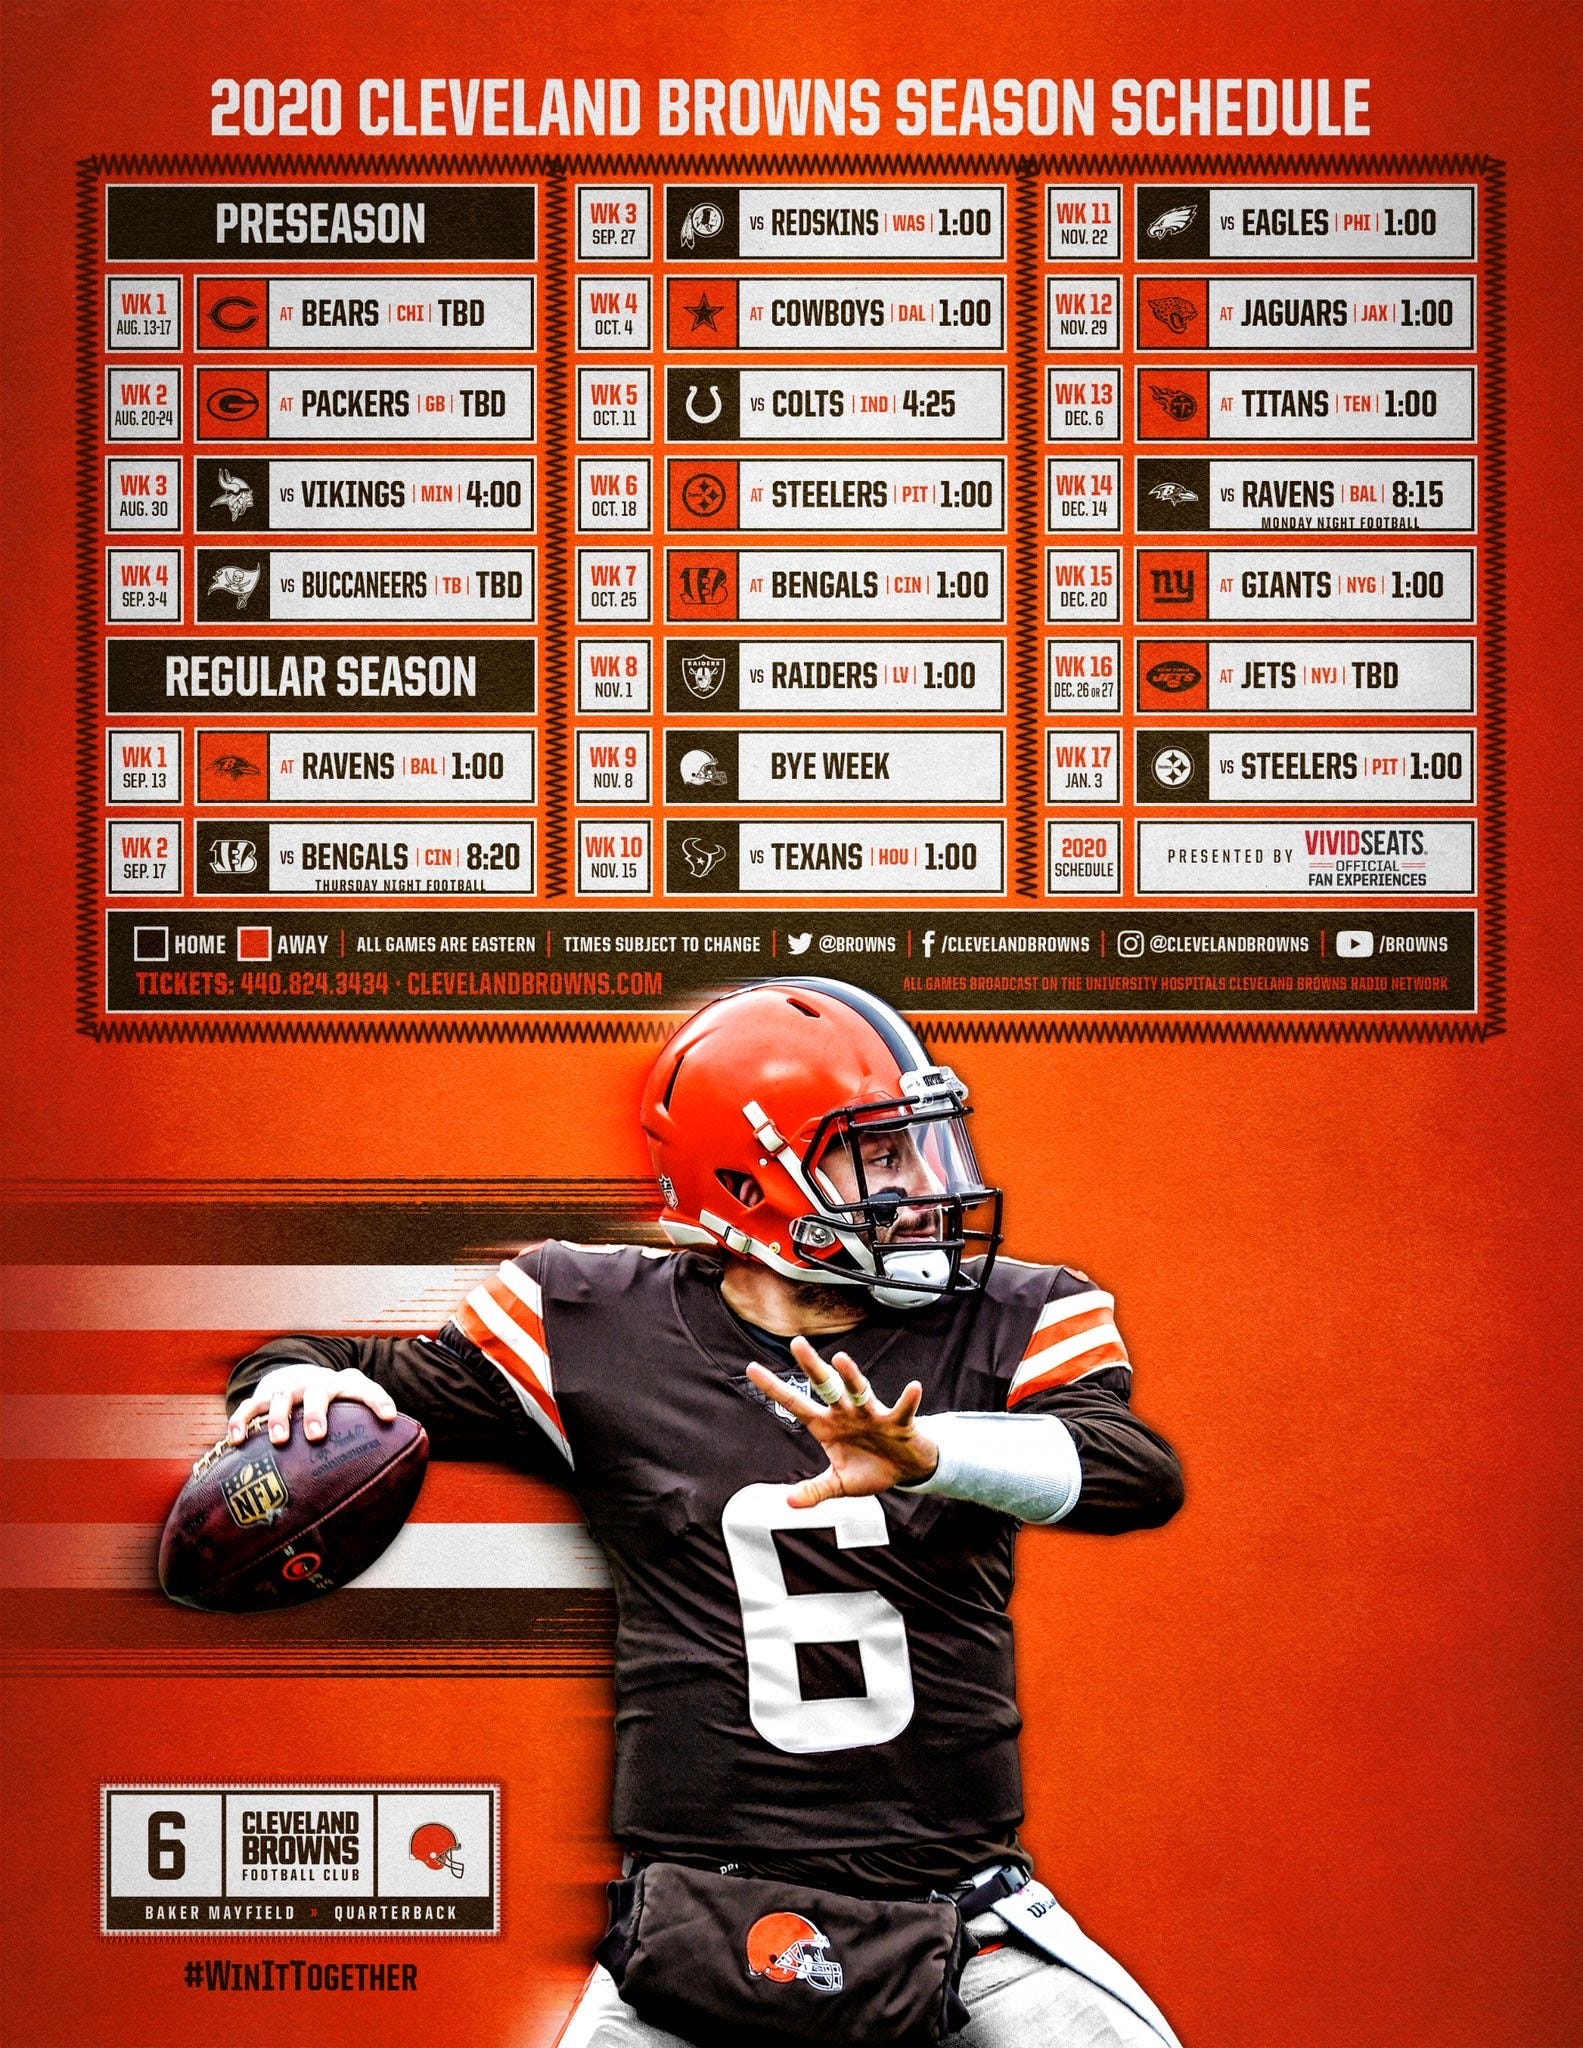 Cleveland Browns: Is Browns' schedule favorable in 2020?